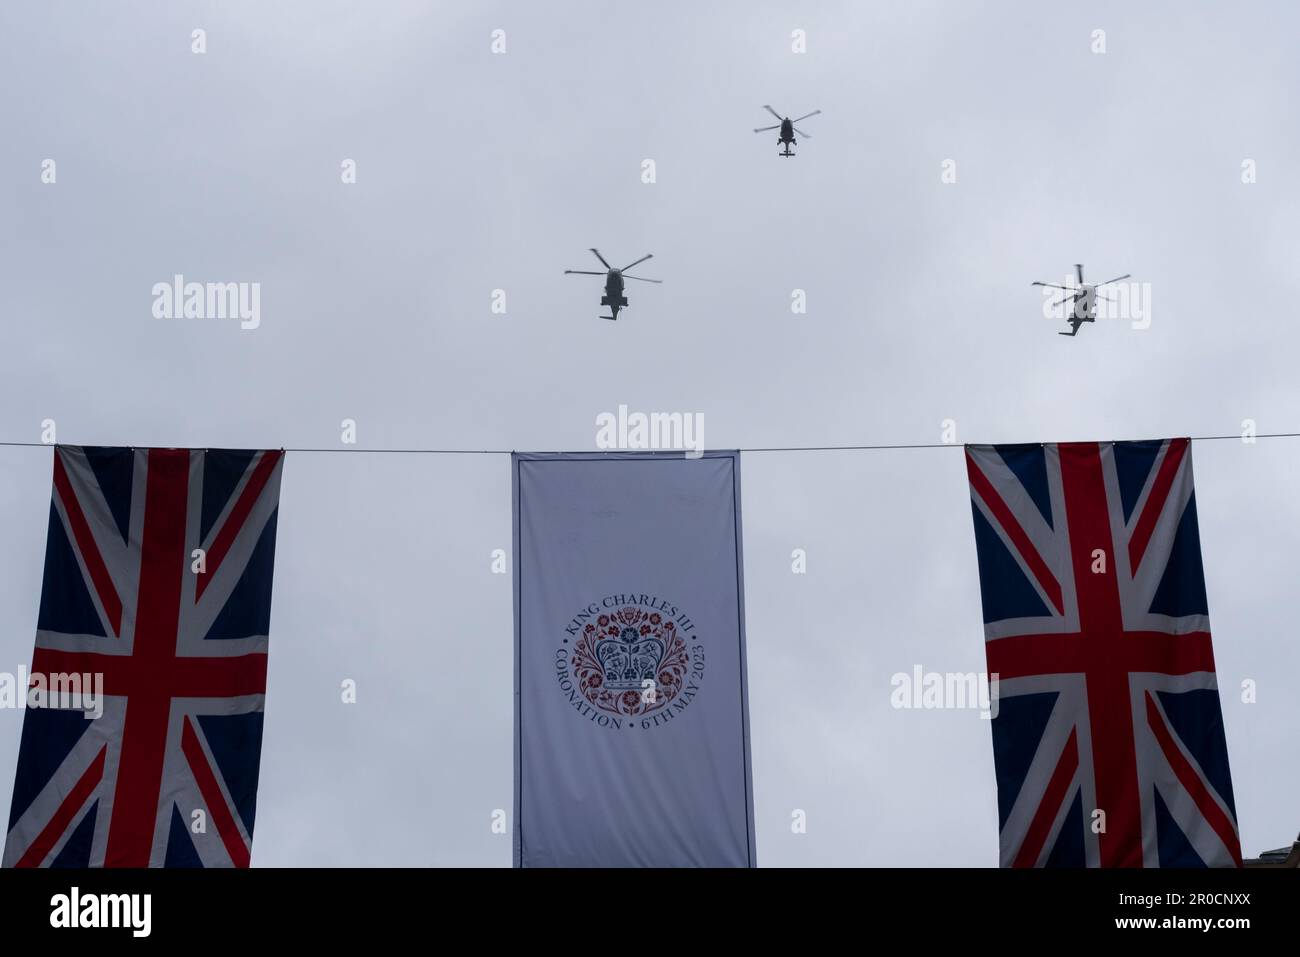 Royal Navy helicopters flying over coronation and Union Jack flags after the Coronation of King Charles III. Westland Wildcat & two Merlin helicopters Stock Photo